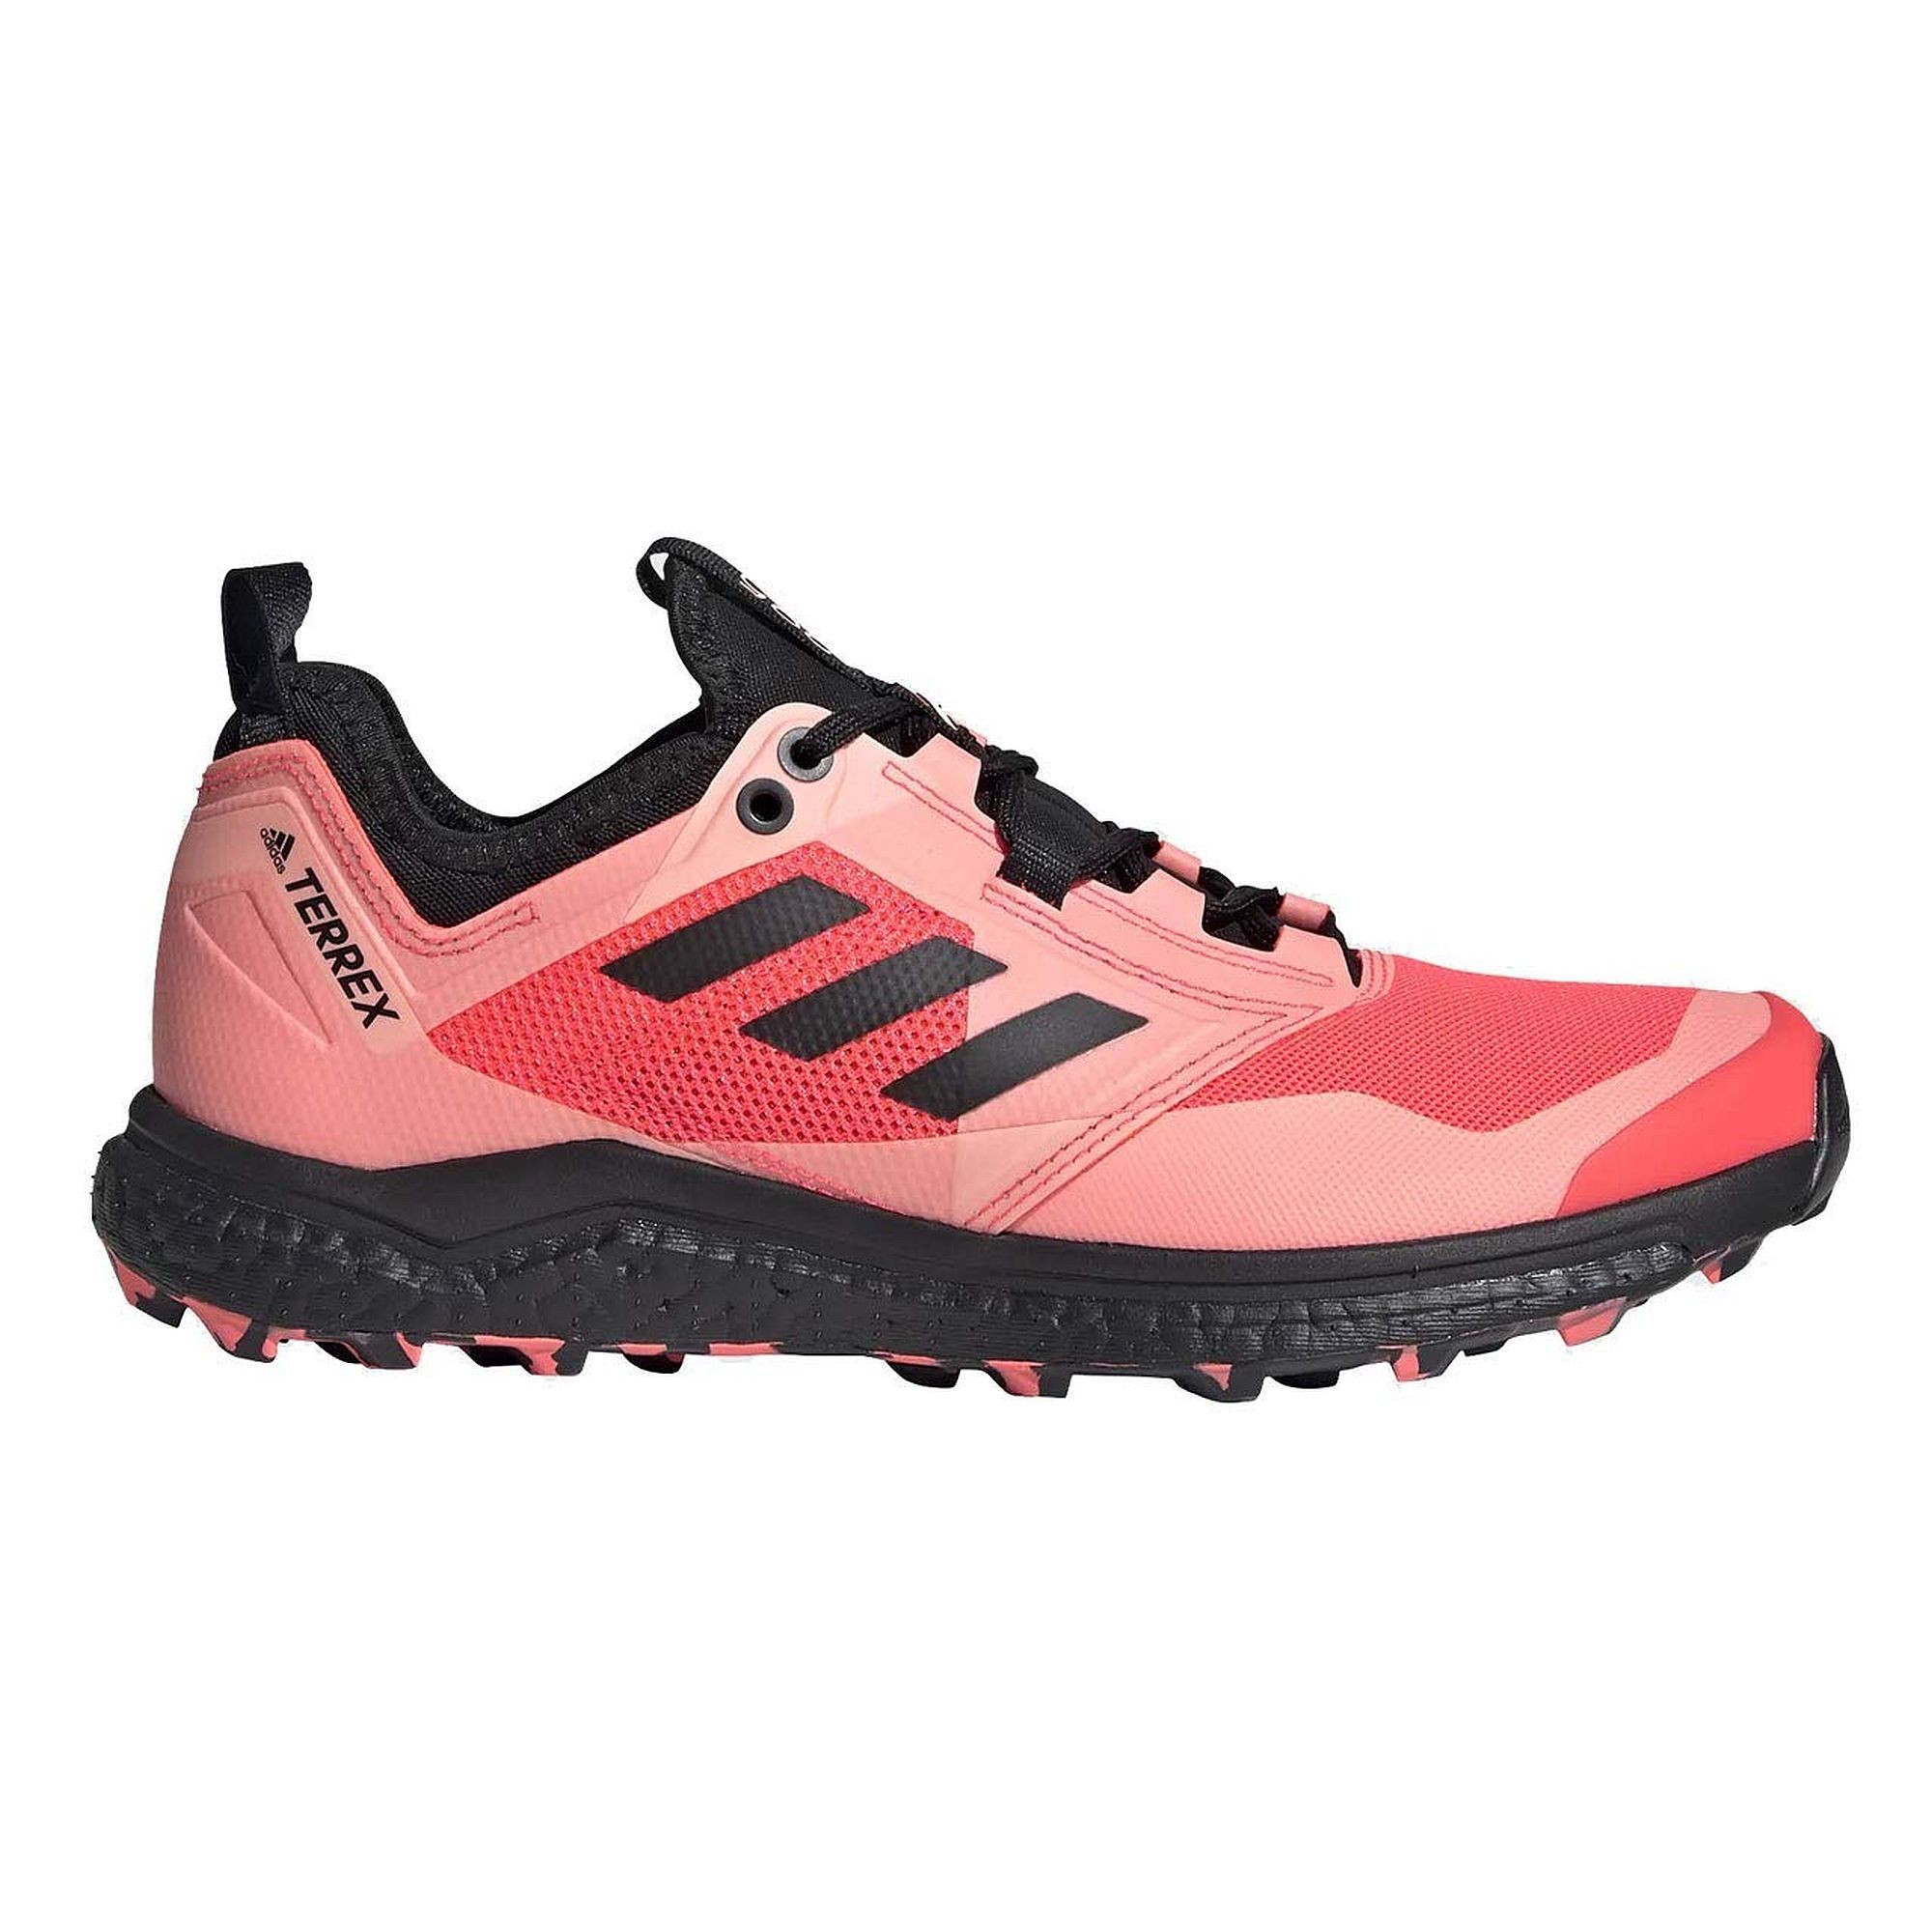 adidas Performance - Running Shoes , Terrex Agravic Xt W - Brands